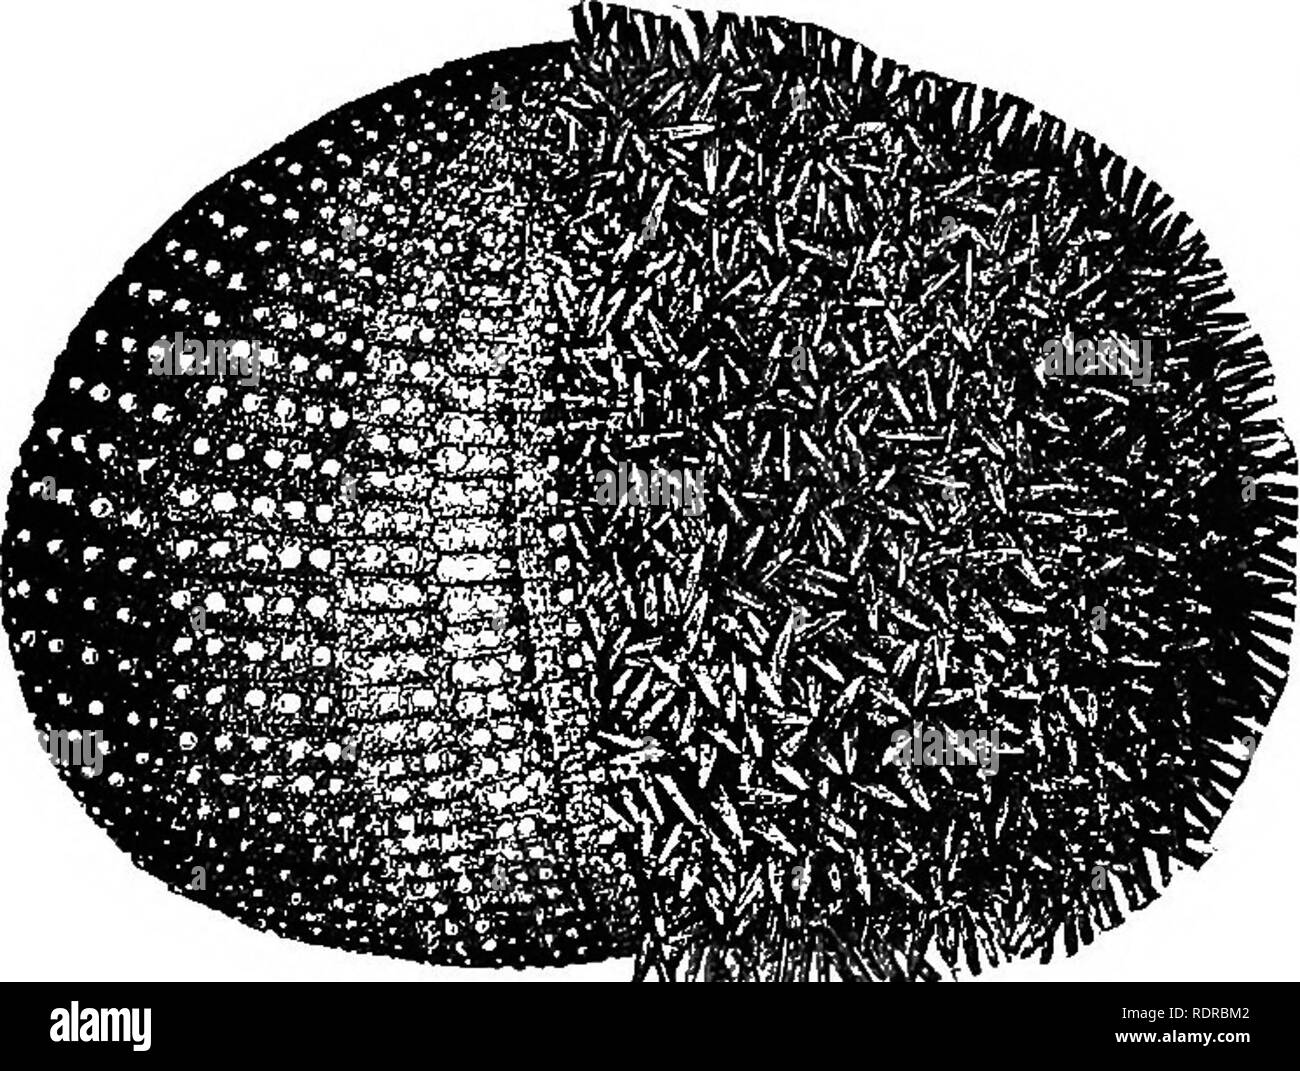 . Fourteen weeks in zoology. Zoology. 260 SUBKIN^GDOM ECHINODERMATA. CLASS II. ECHINOIDEA. General Characteristics.—The Echin like) are covered with spines, raoved by the Fig. 14,5.. EcKirms sp/itera. Sea Urchin. Spines remoyed from left half. to move over the rocks (pediciUanm), each ending in forceps, apparently for pre- hension and for rid- ding the animal of parasites. The mouth is armed with fi V e sharp teeth, which con- tinually wear upon one another, but, * A fnll-sfTown Urchin may have five hundred plates, four thousand spines, and perhaps two thousand suckers. Mingled with the oids ( Stock Photo